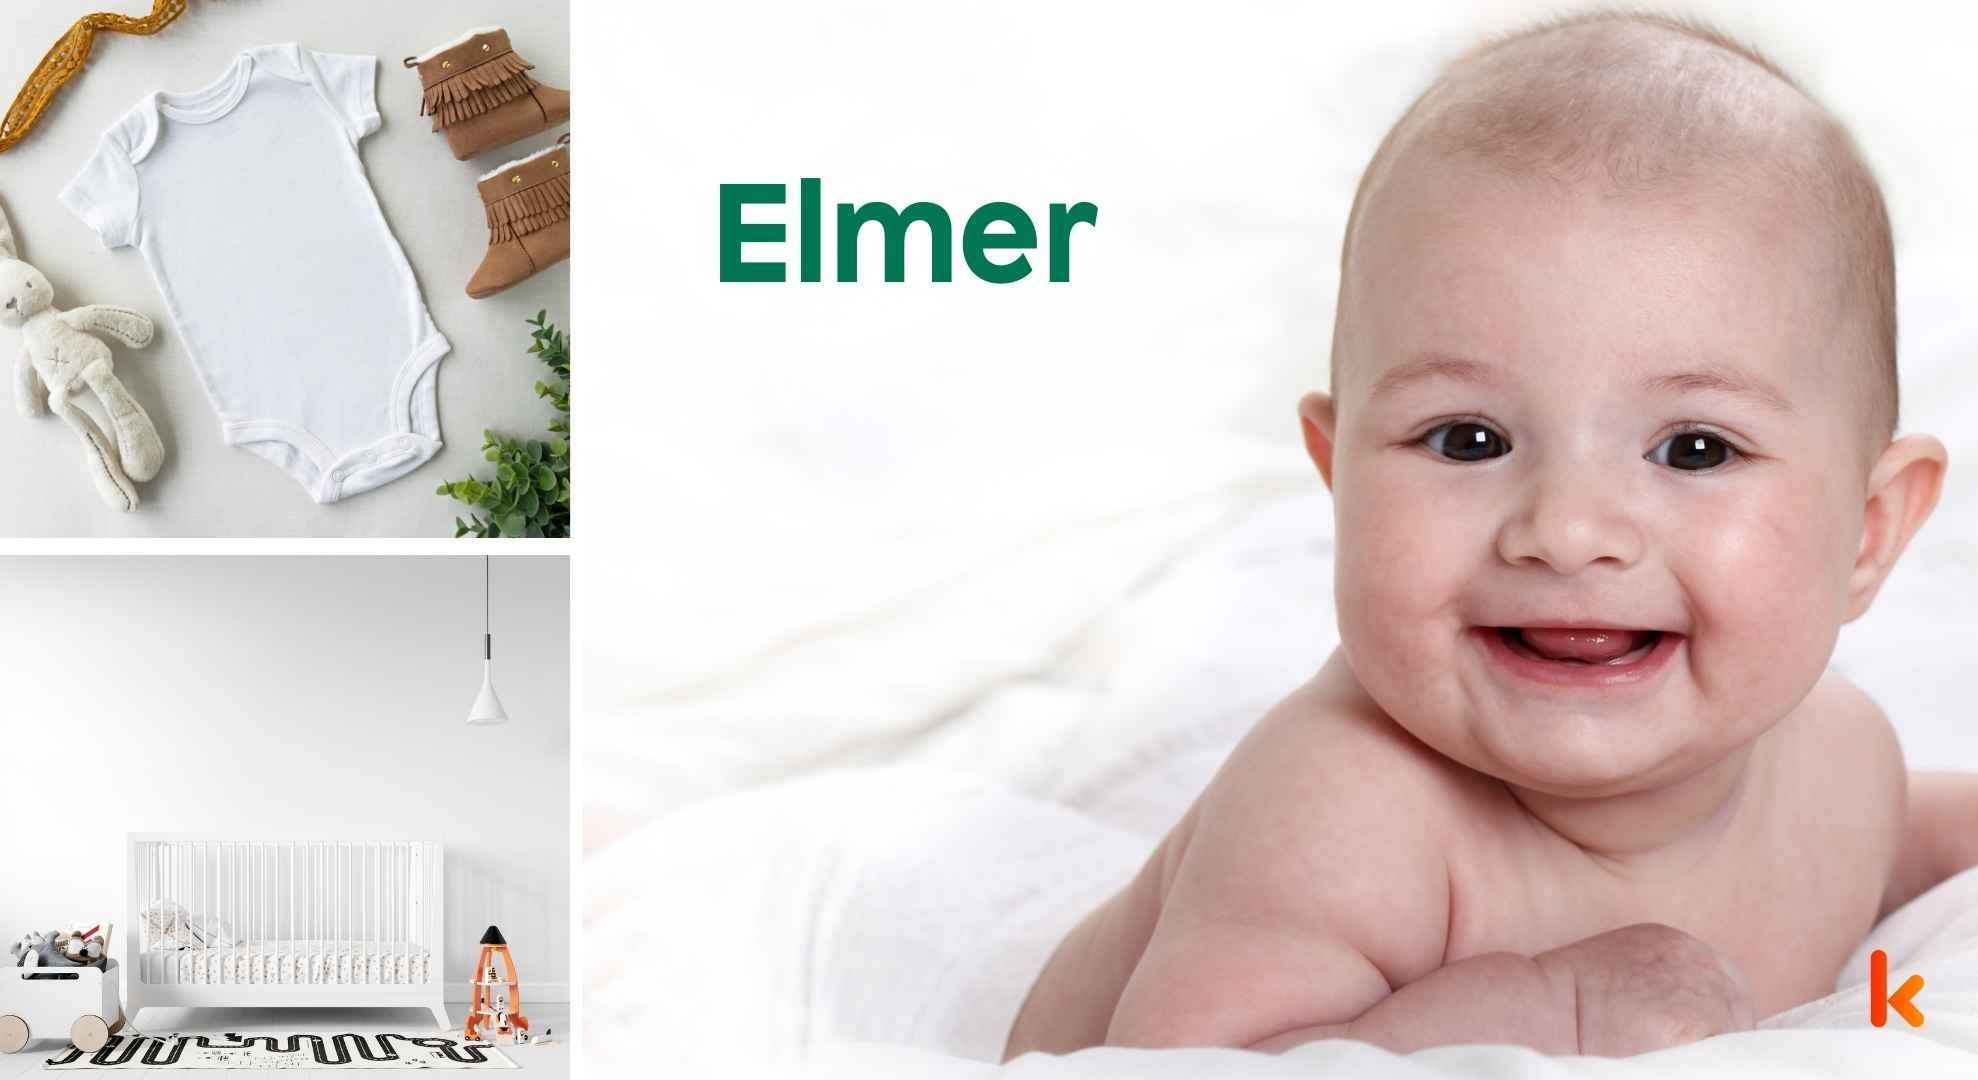 Meaning of the name Elmer